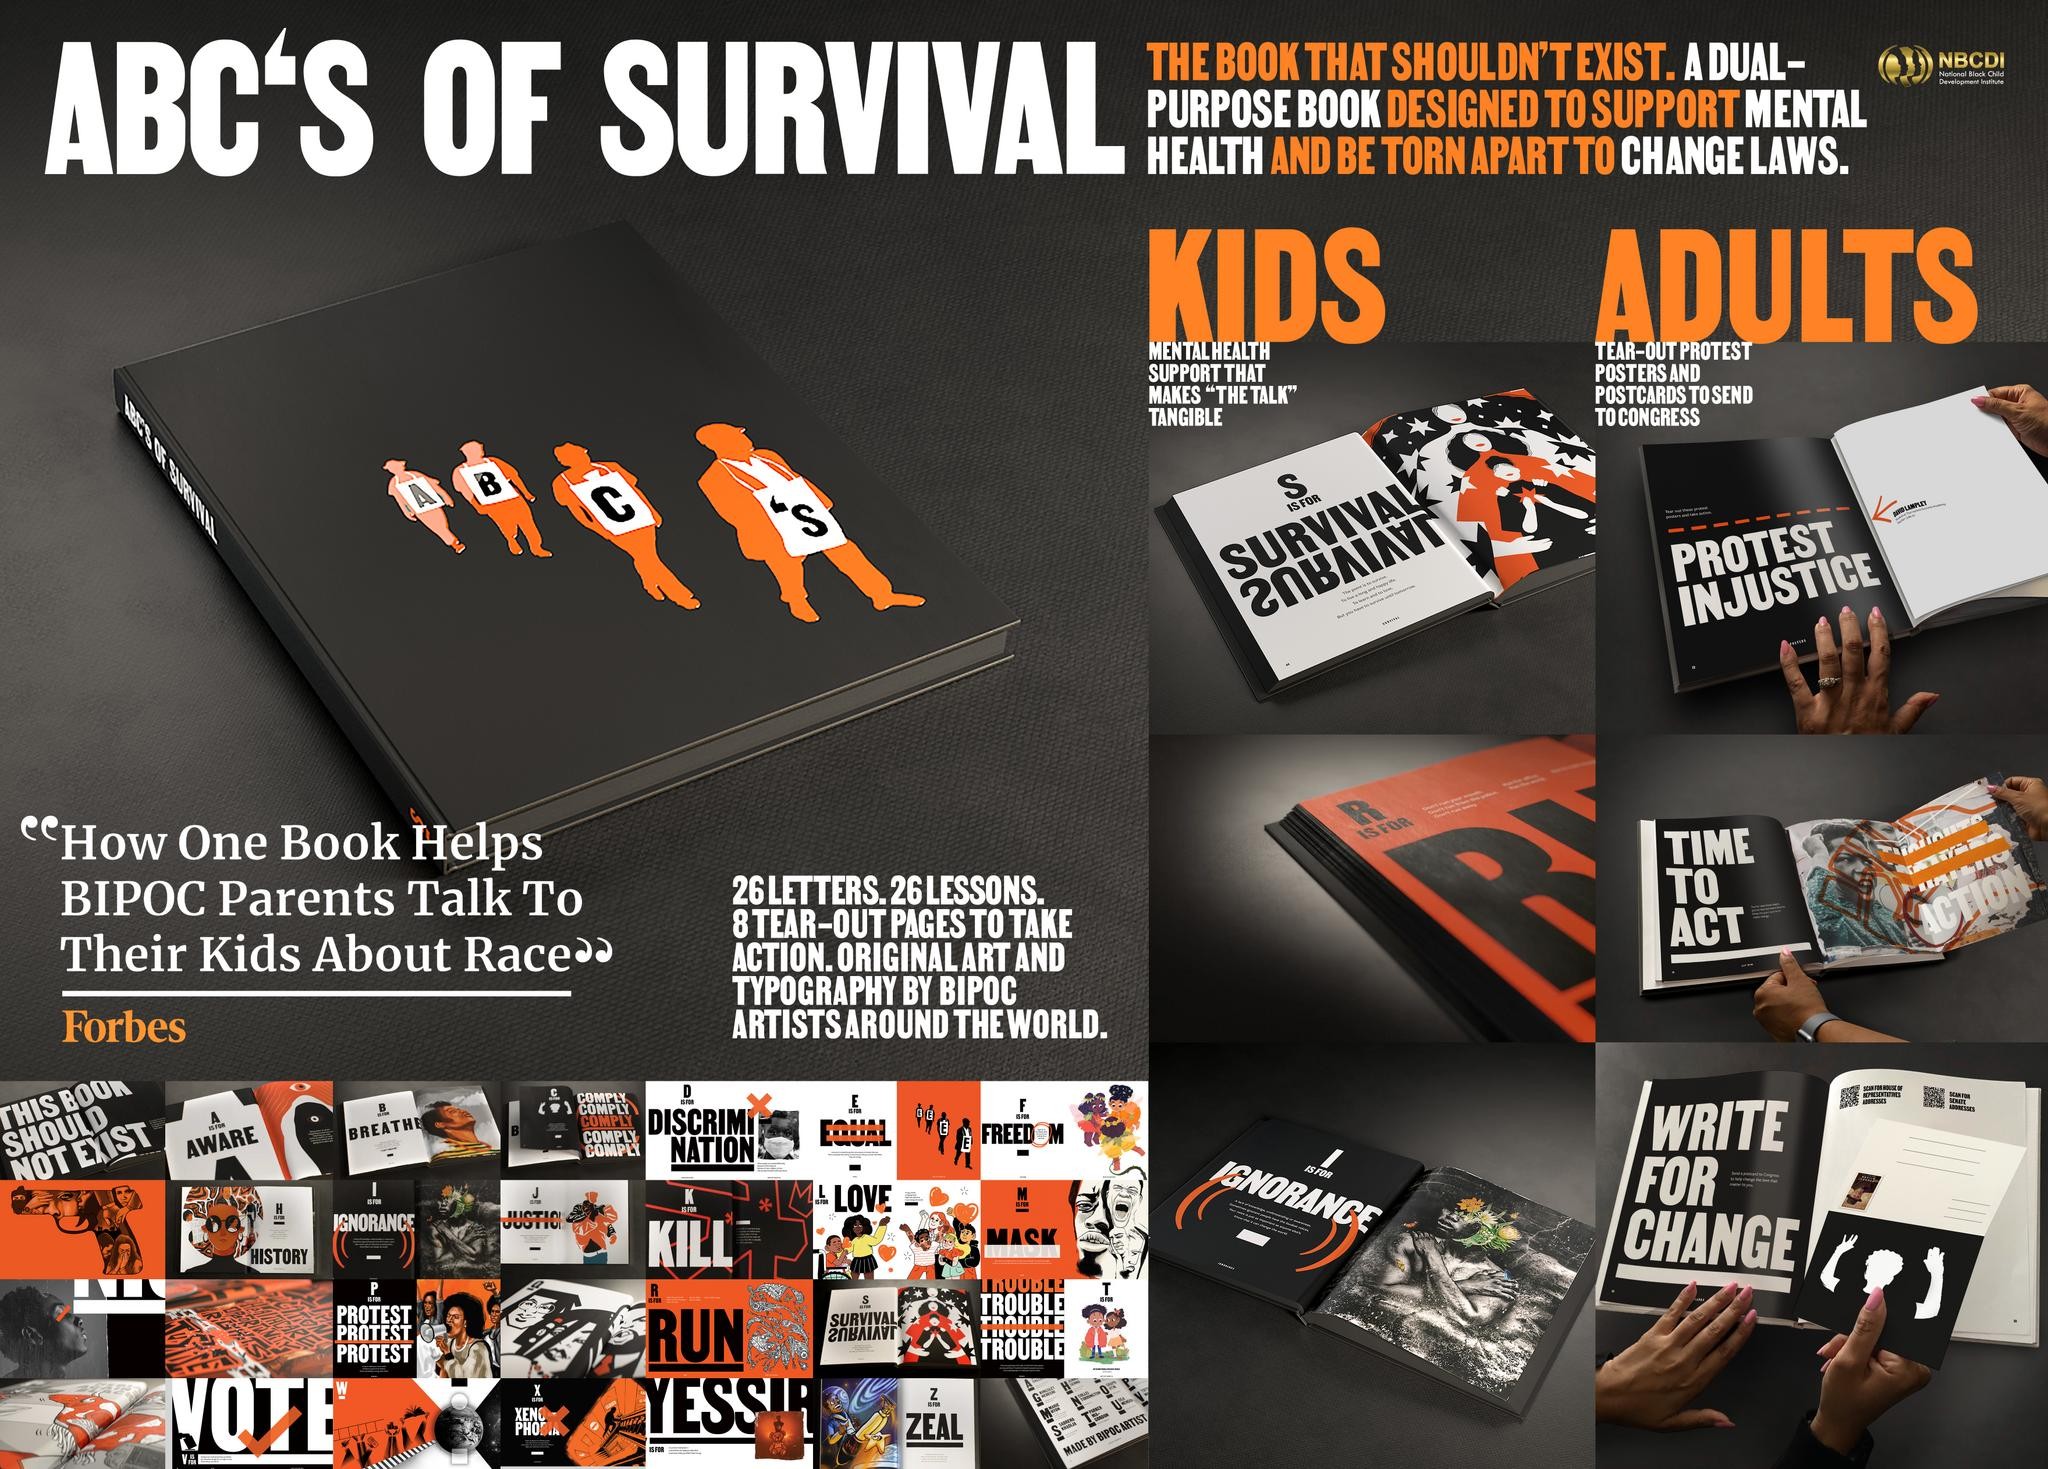 ABCS OF SURVIVAL